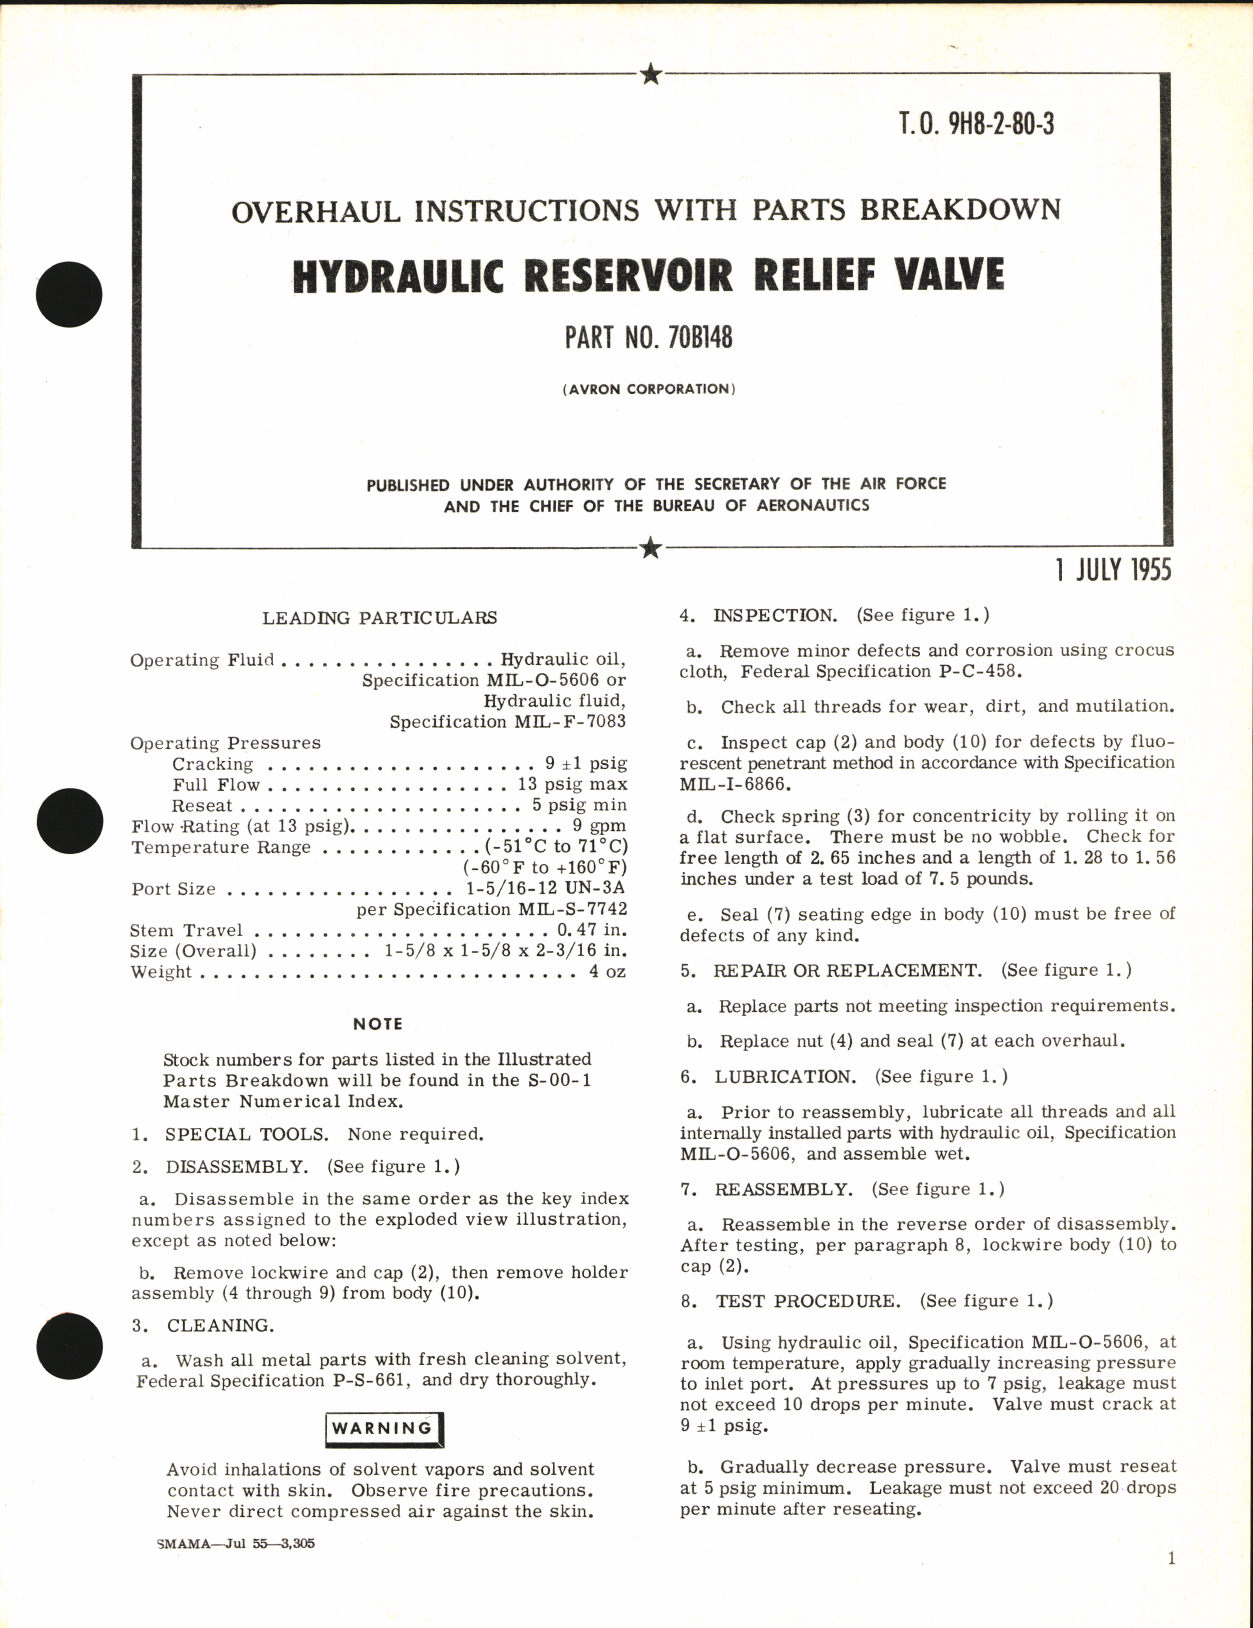 Sample page 1 from AirCorps Library document: Overhaul Instructions with Parts Breakdown for Hydraulic Reservoir Relief Valve Part No. 70B148